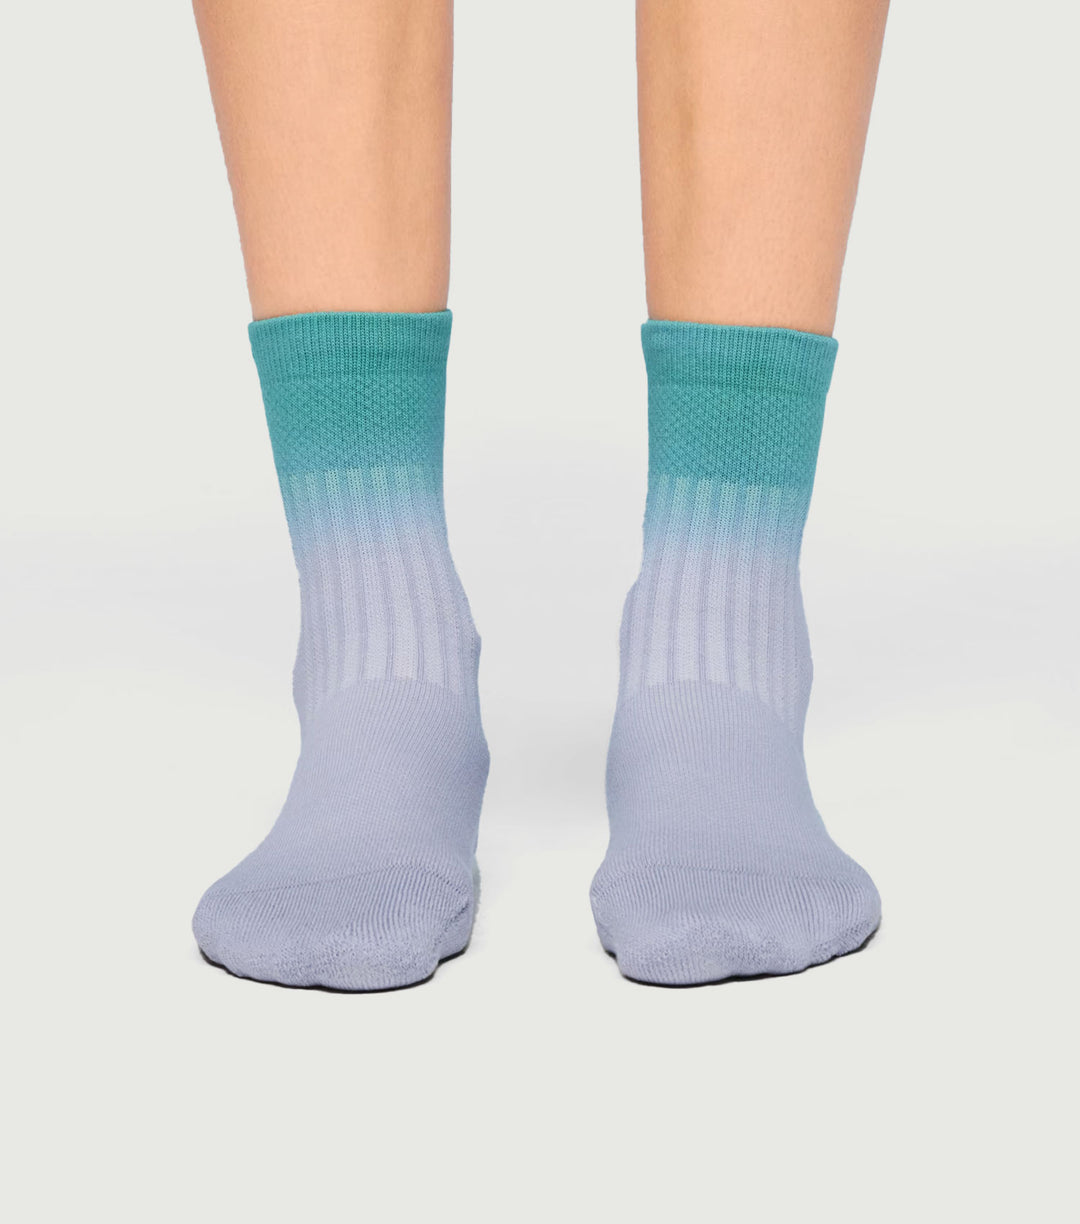 All-Day Sock Iceblue/Melone - On Running